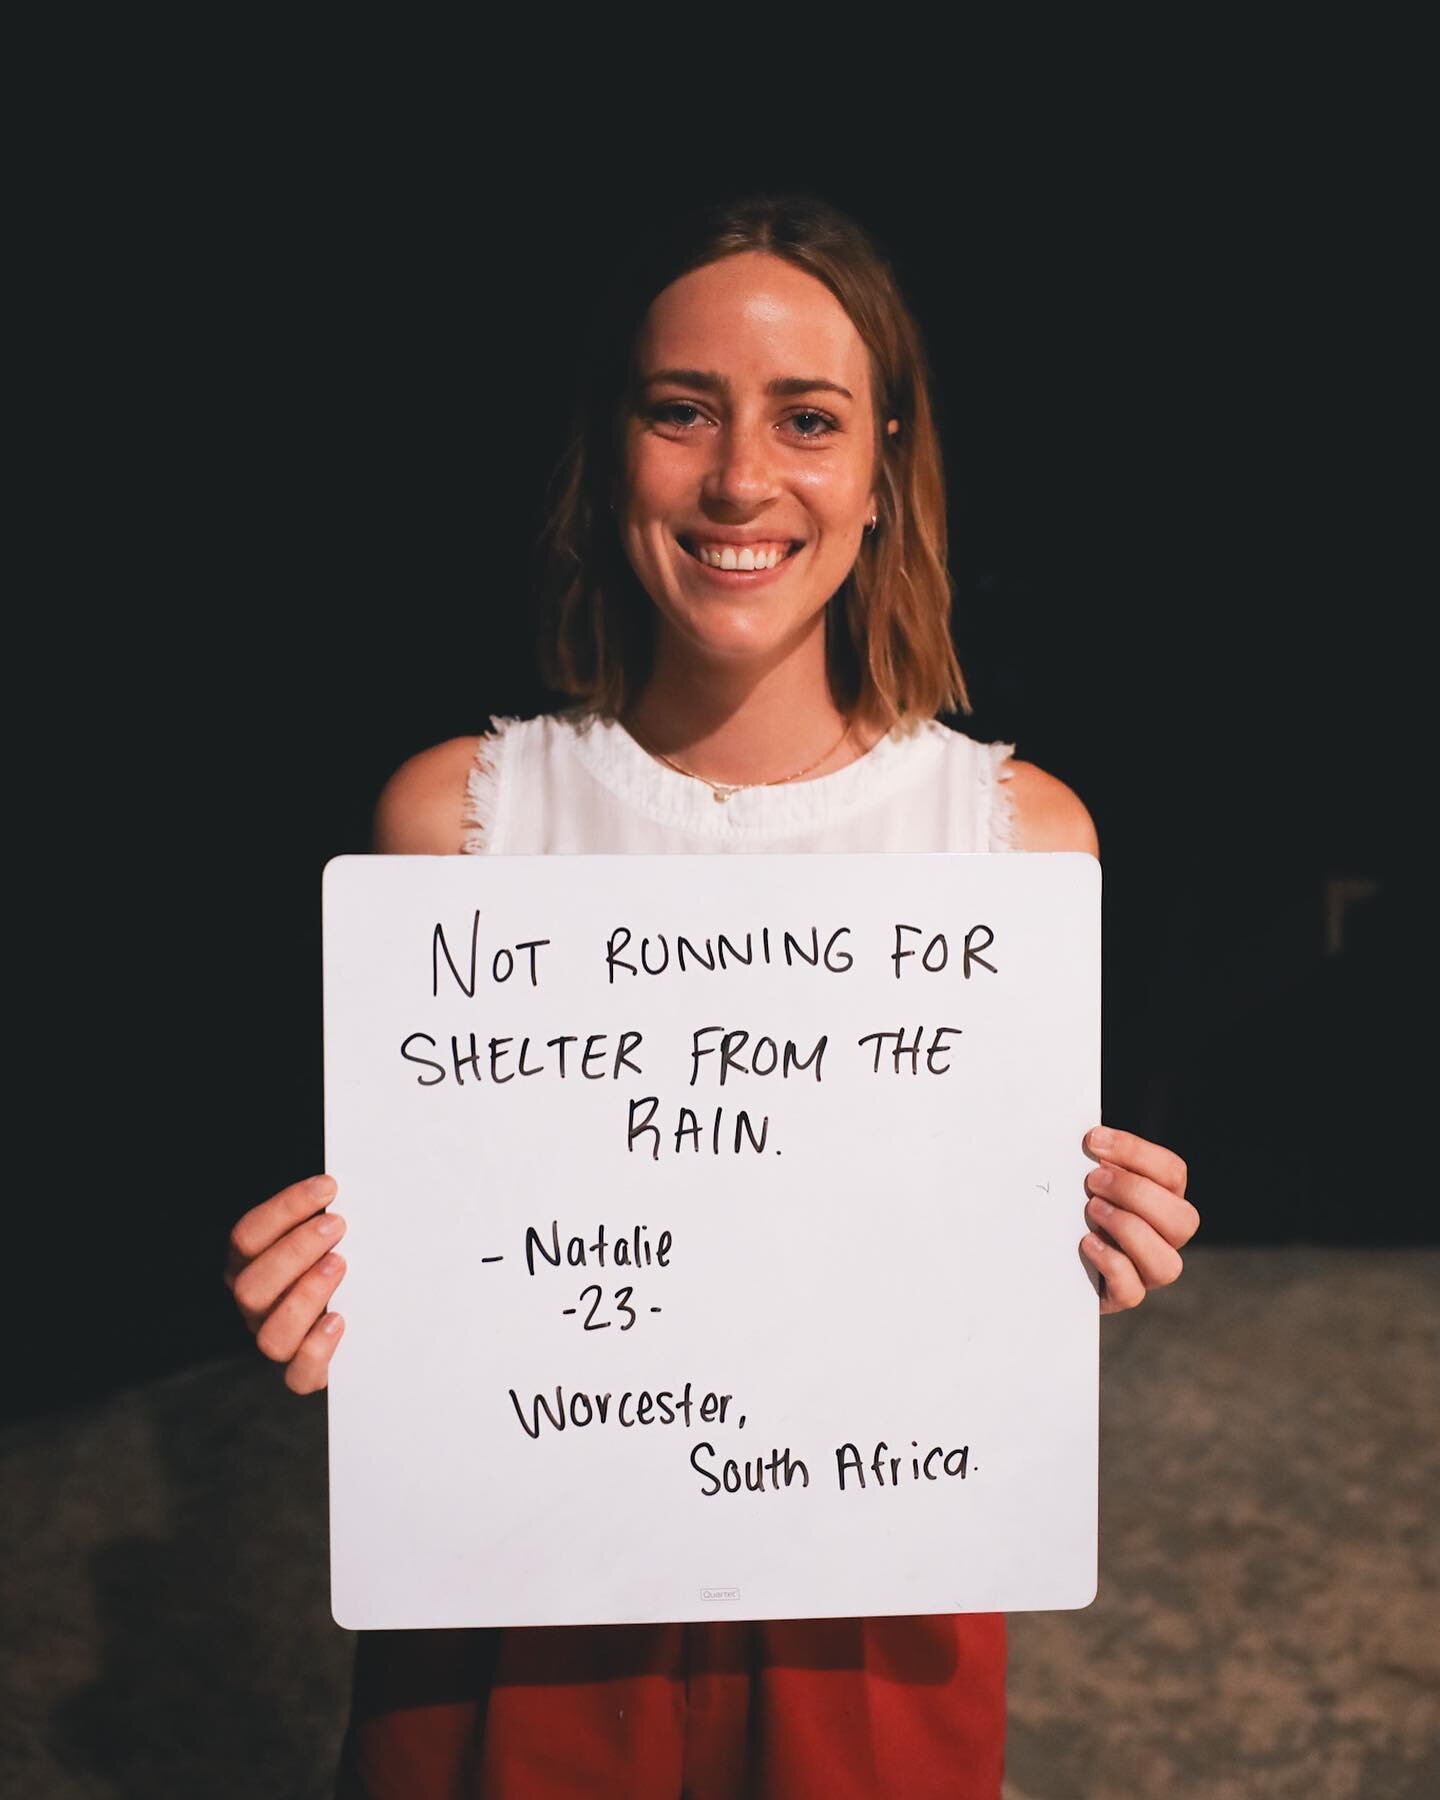 What does &ldquo;Seizing The Moment&rdquo; mean to you??
.
&ldquo;Not running for shelter from the rain.&rdquo; - @natcanipe 
.
Natalie Canipe
World Traveller 🌎
Age 23
Worcester, South Africa 🦁
.
.
#CarpeMomentum | #thetimeisnow | #seizethemoment |